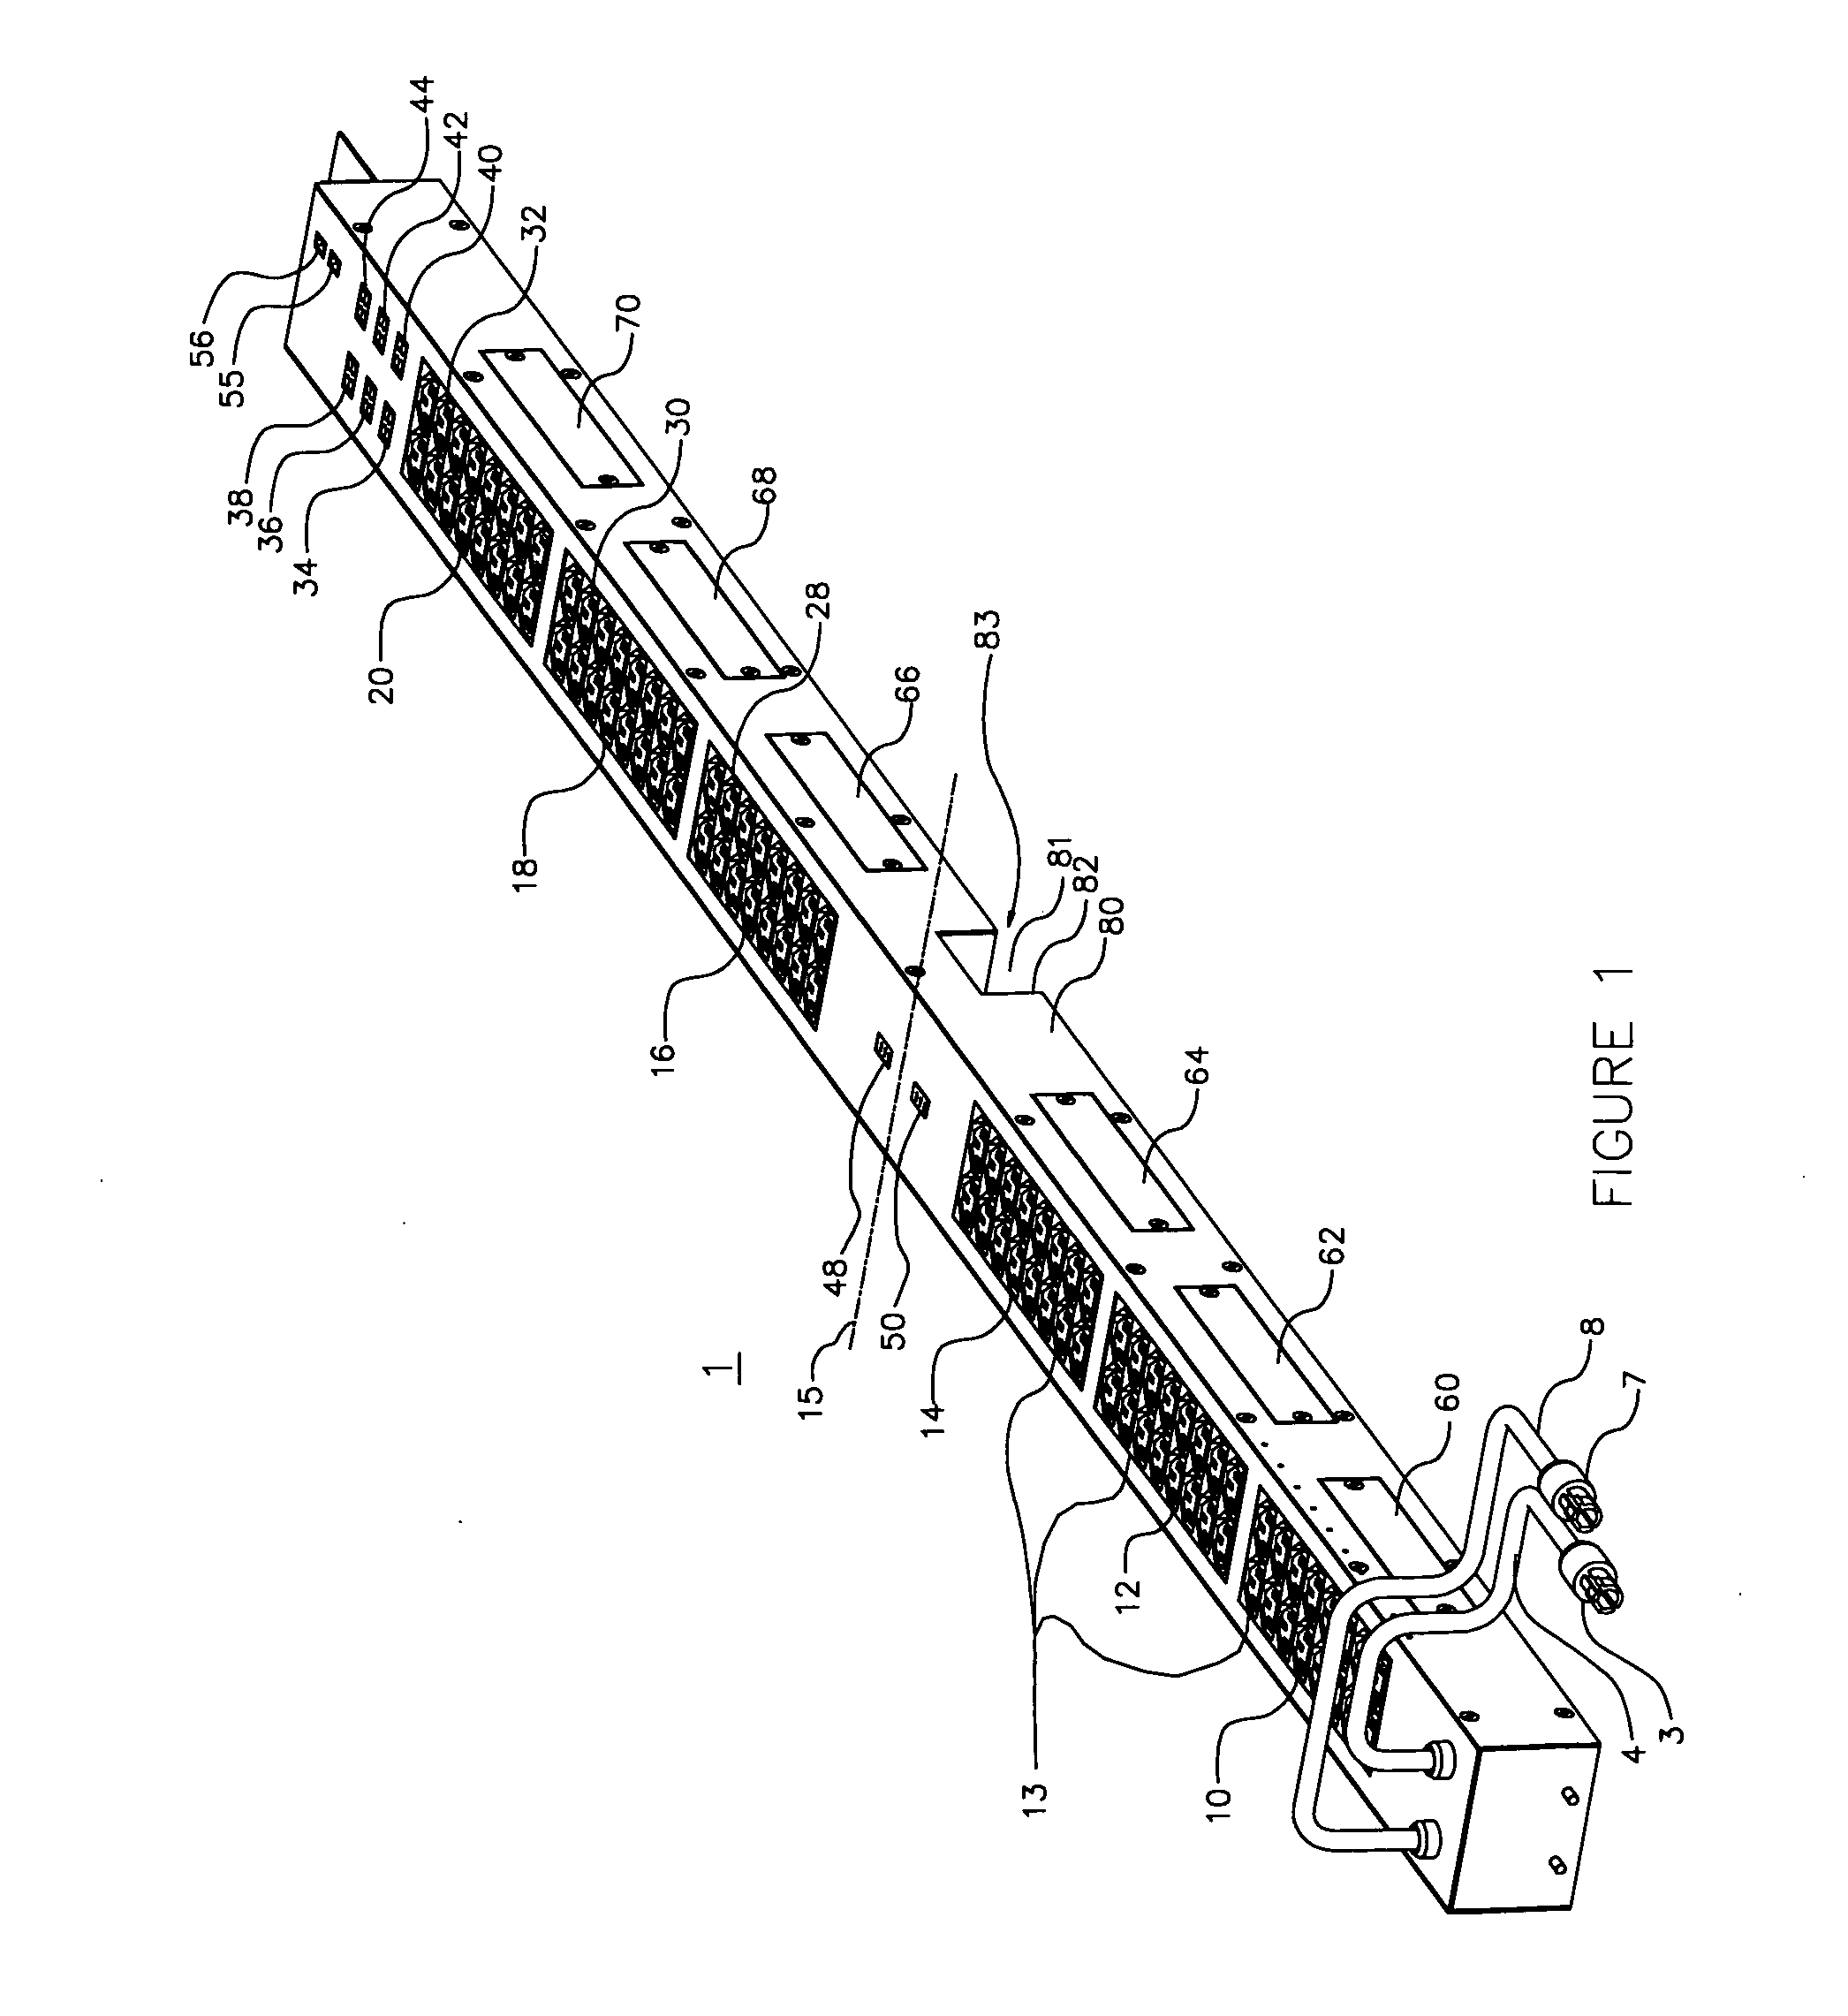 Electrical circuit apparatus with fuse access section